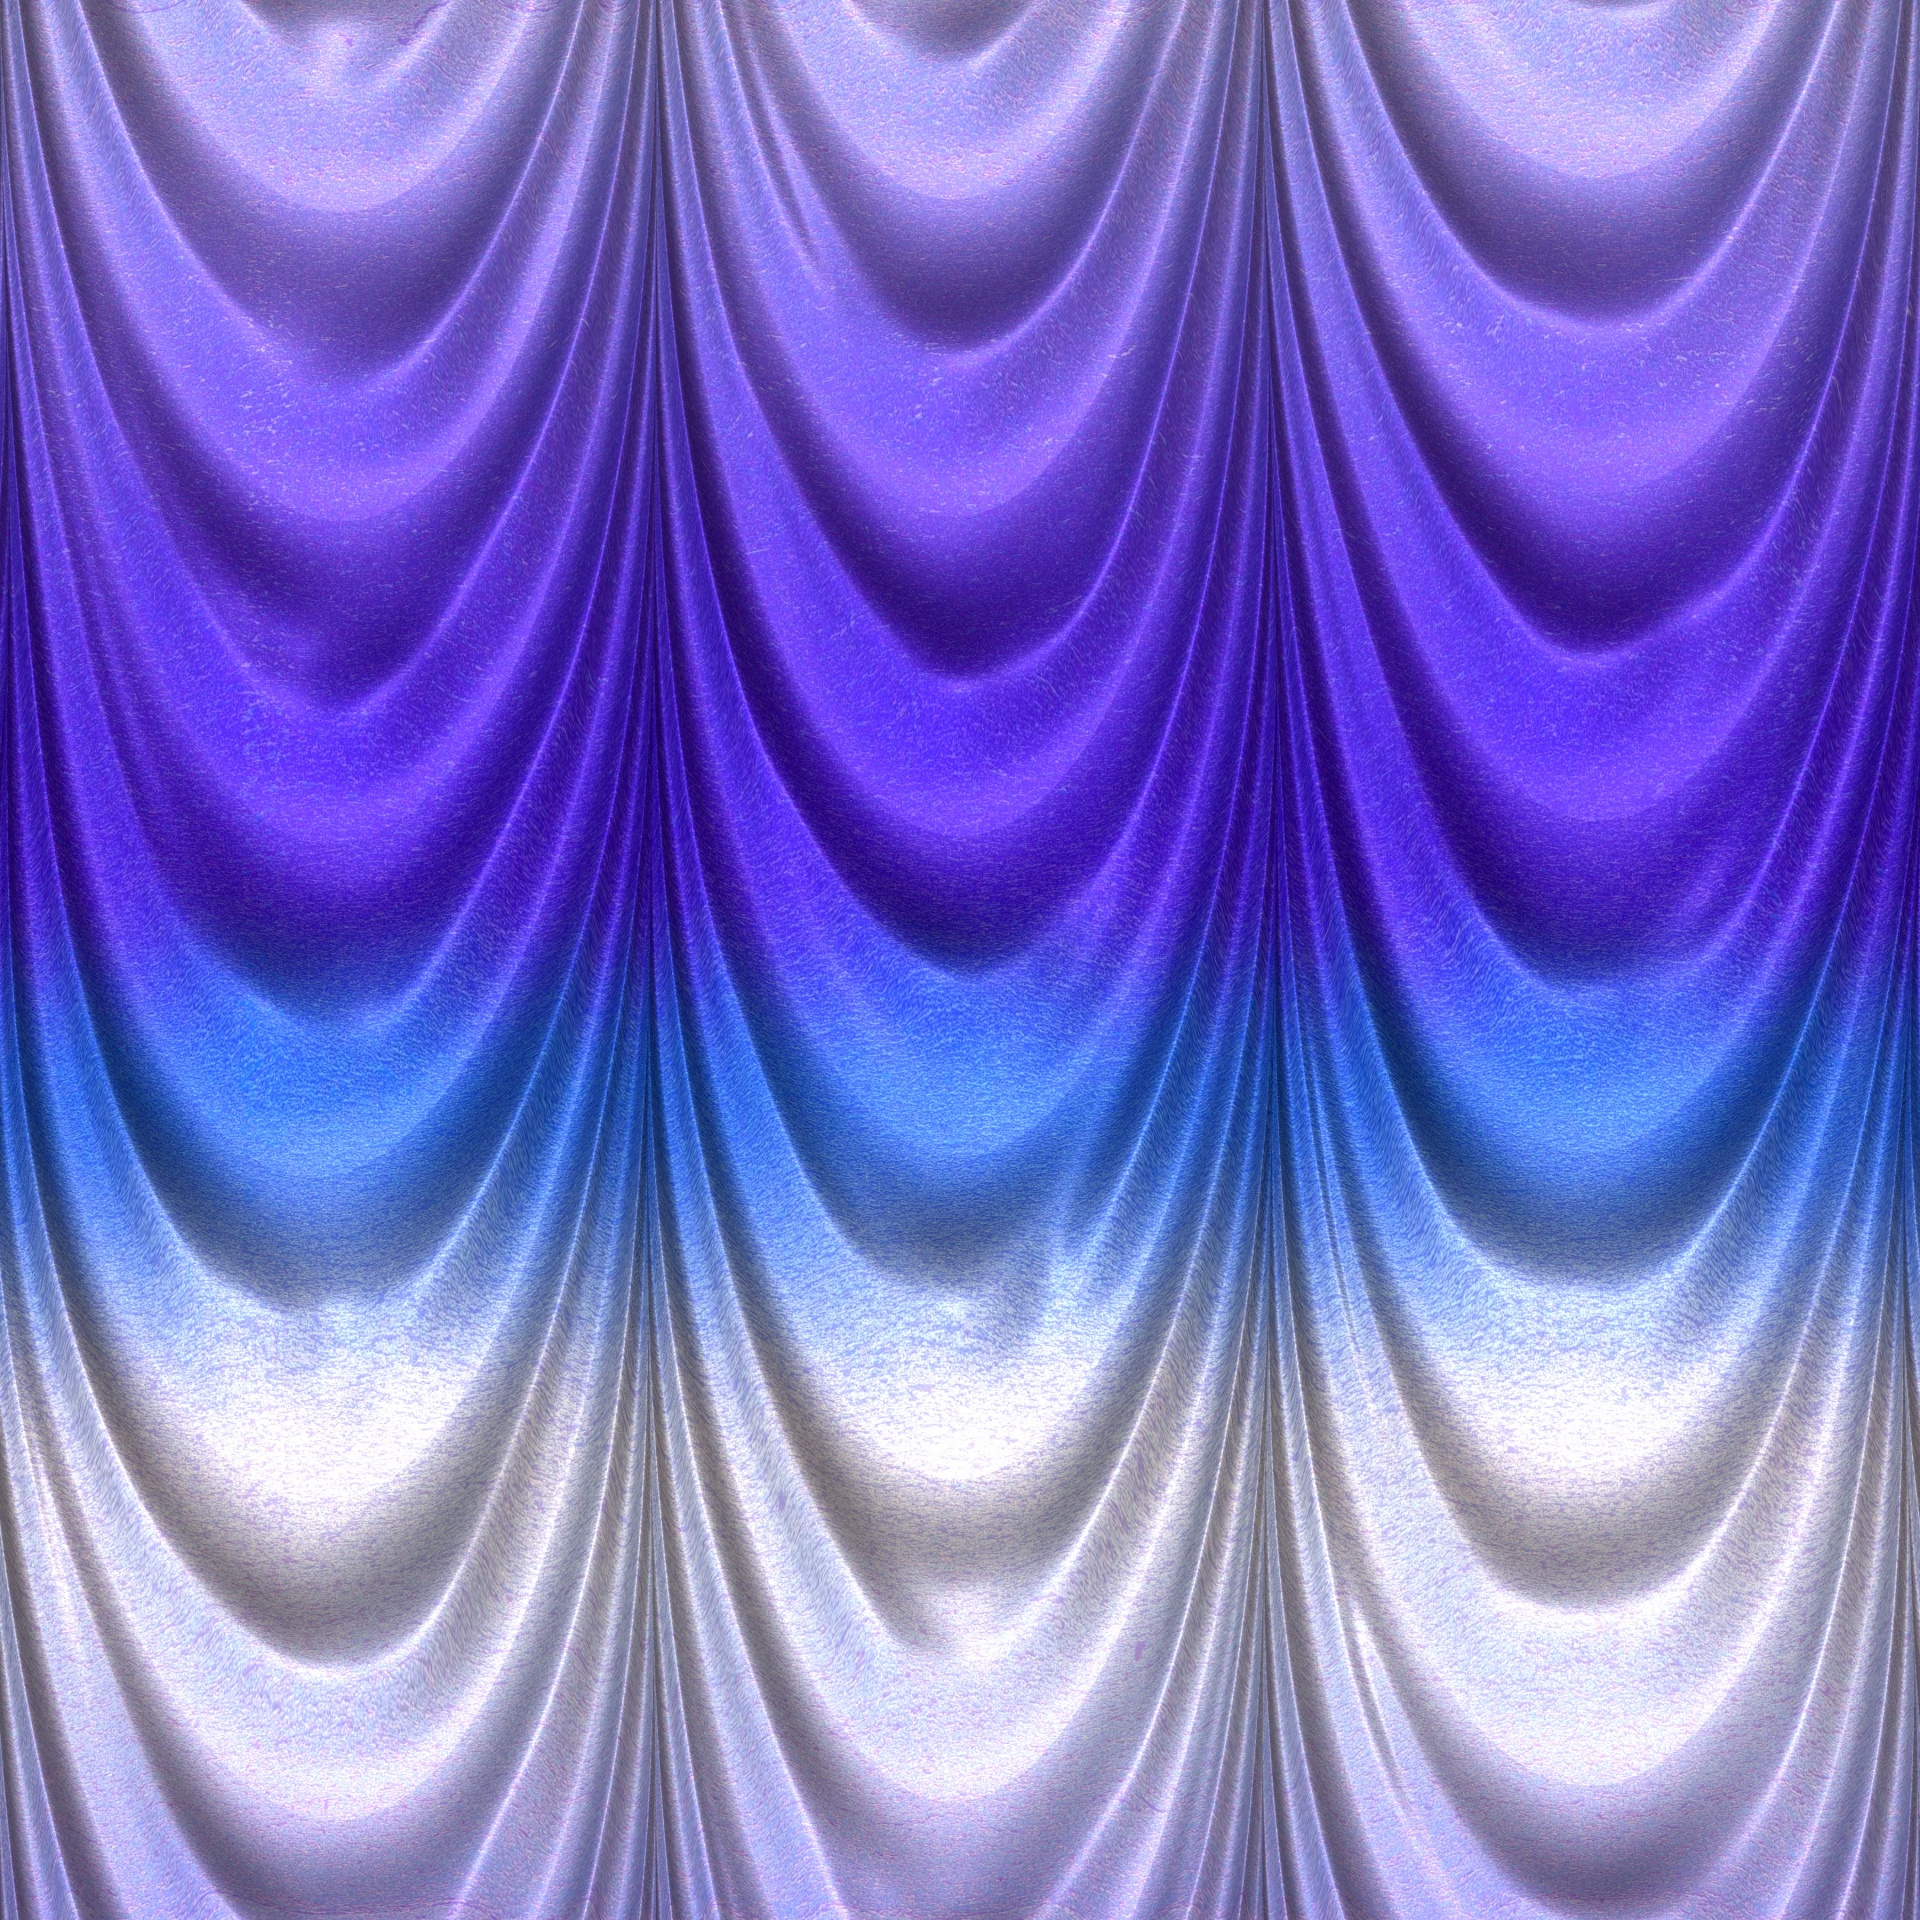 Fabric curtain in blue, mauve and white gradient for scrapbooking or other